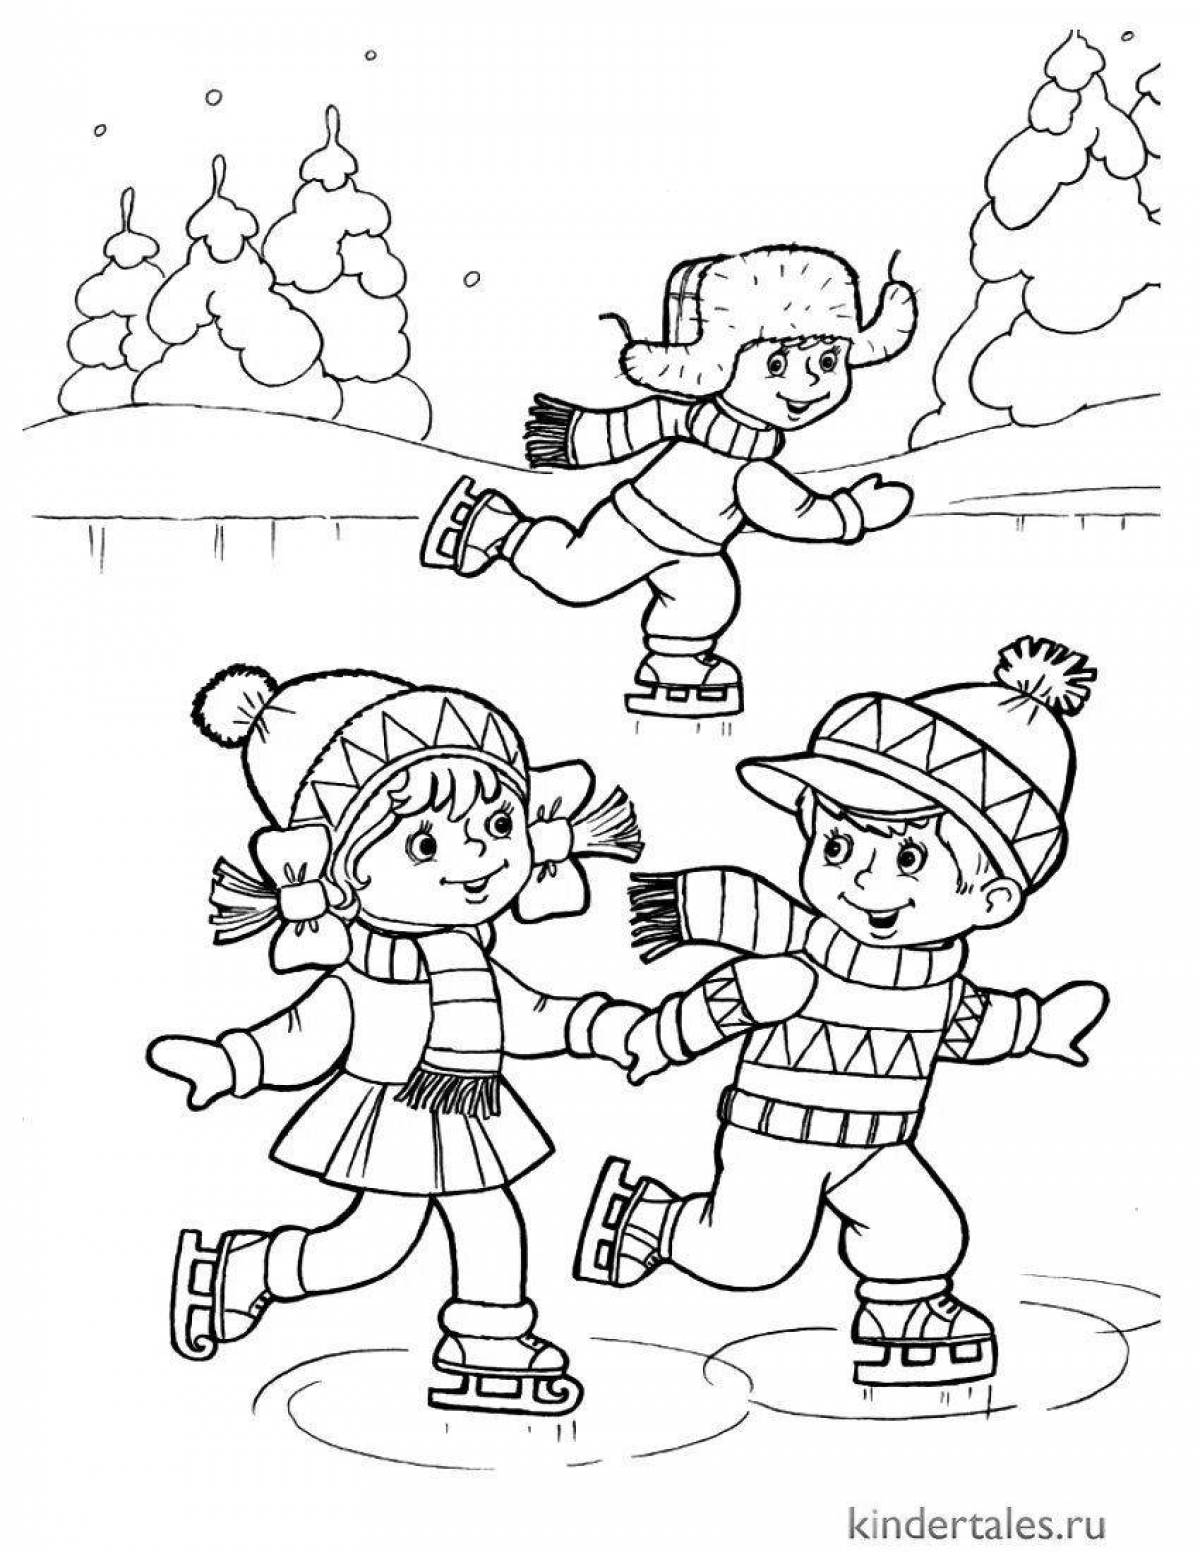 Creative winter fun coloring book for 3-4 year olds in kindergarten